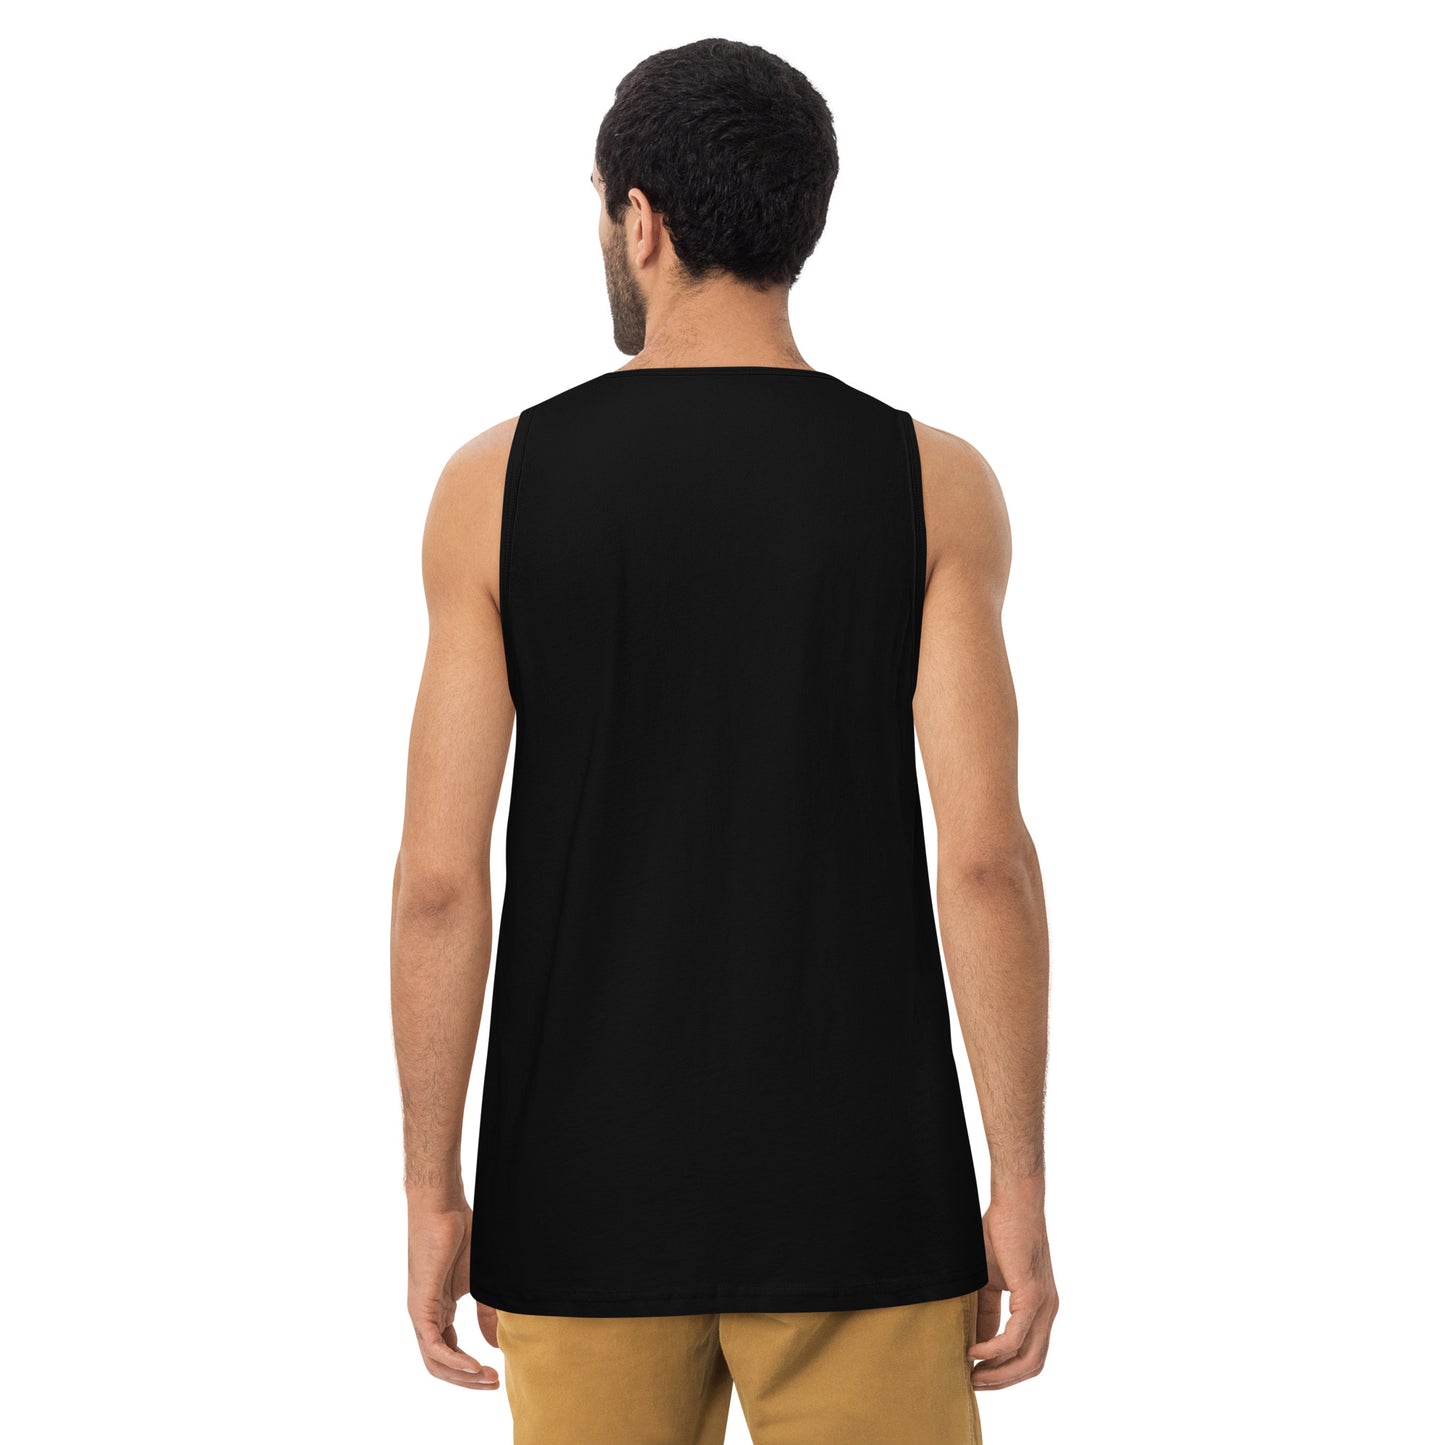 "Only on Main Street" (Local Businesses) Men’s Premium Tank Top